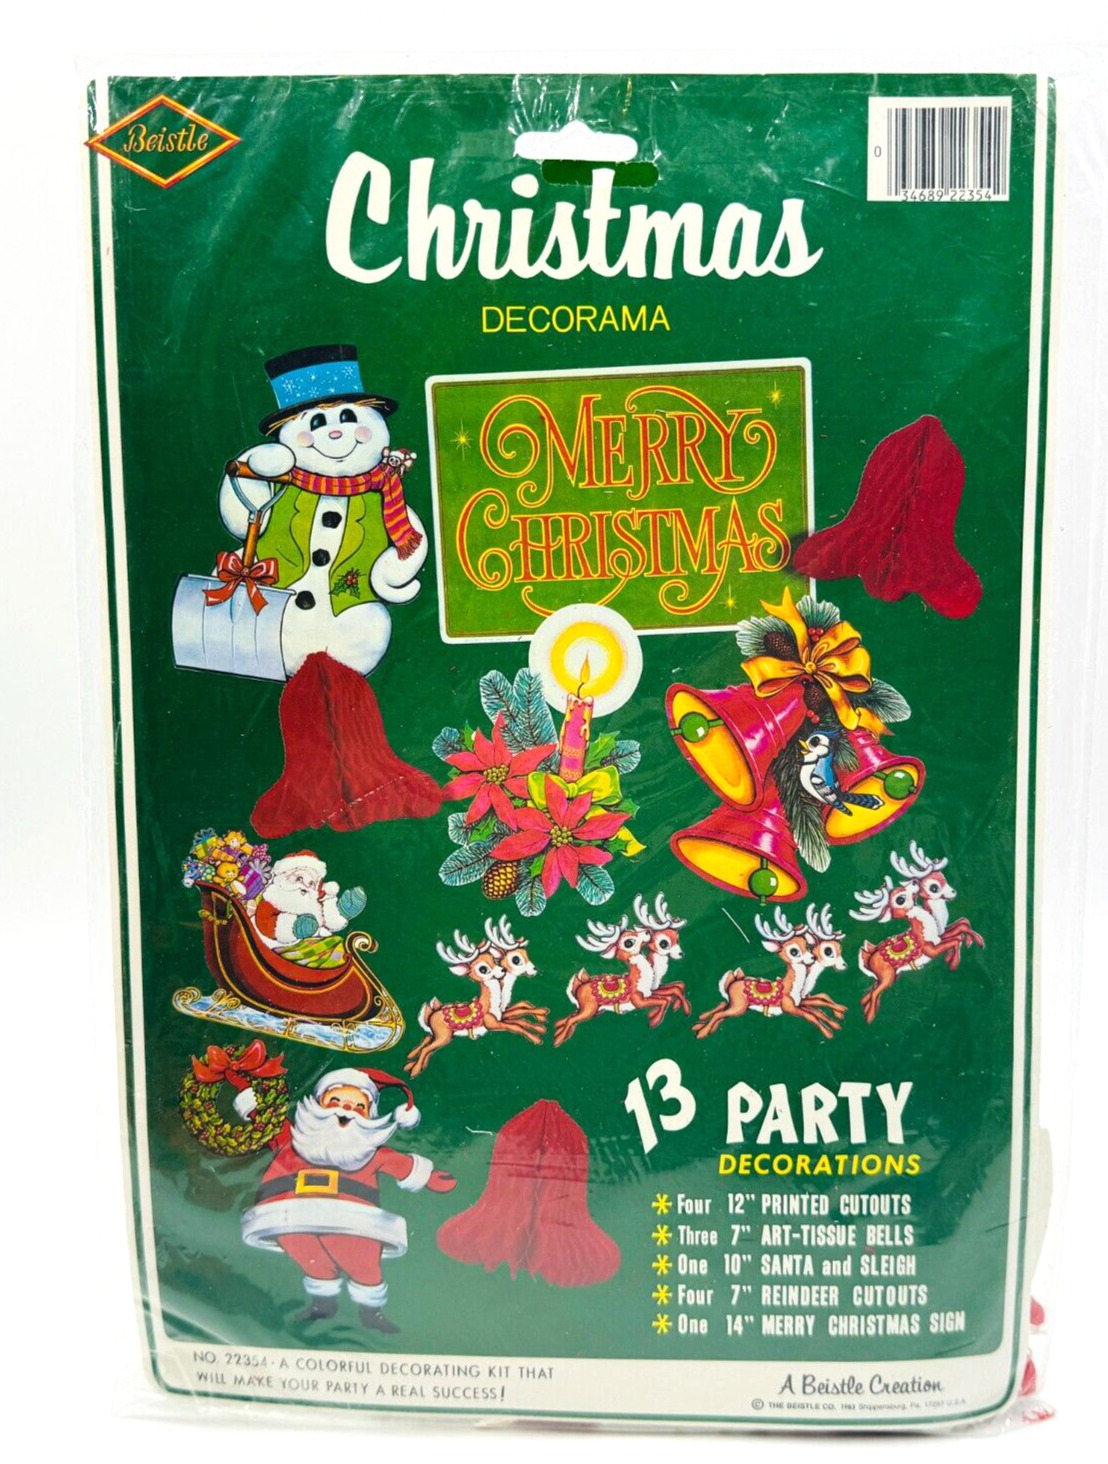 Beistle Creation Christmas Decorama Merry Collection 13 Party Decor NEW 1983